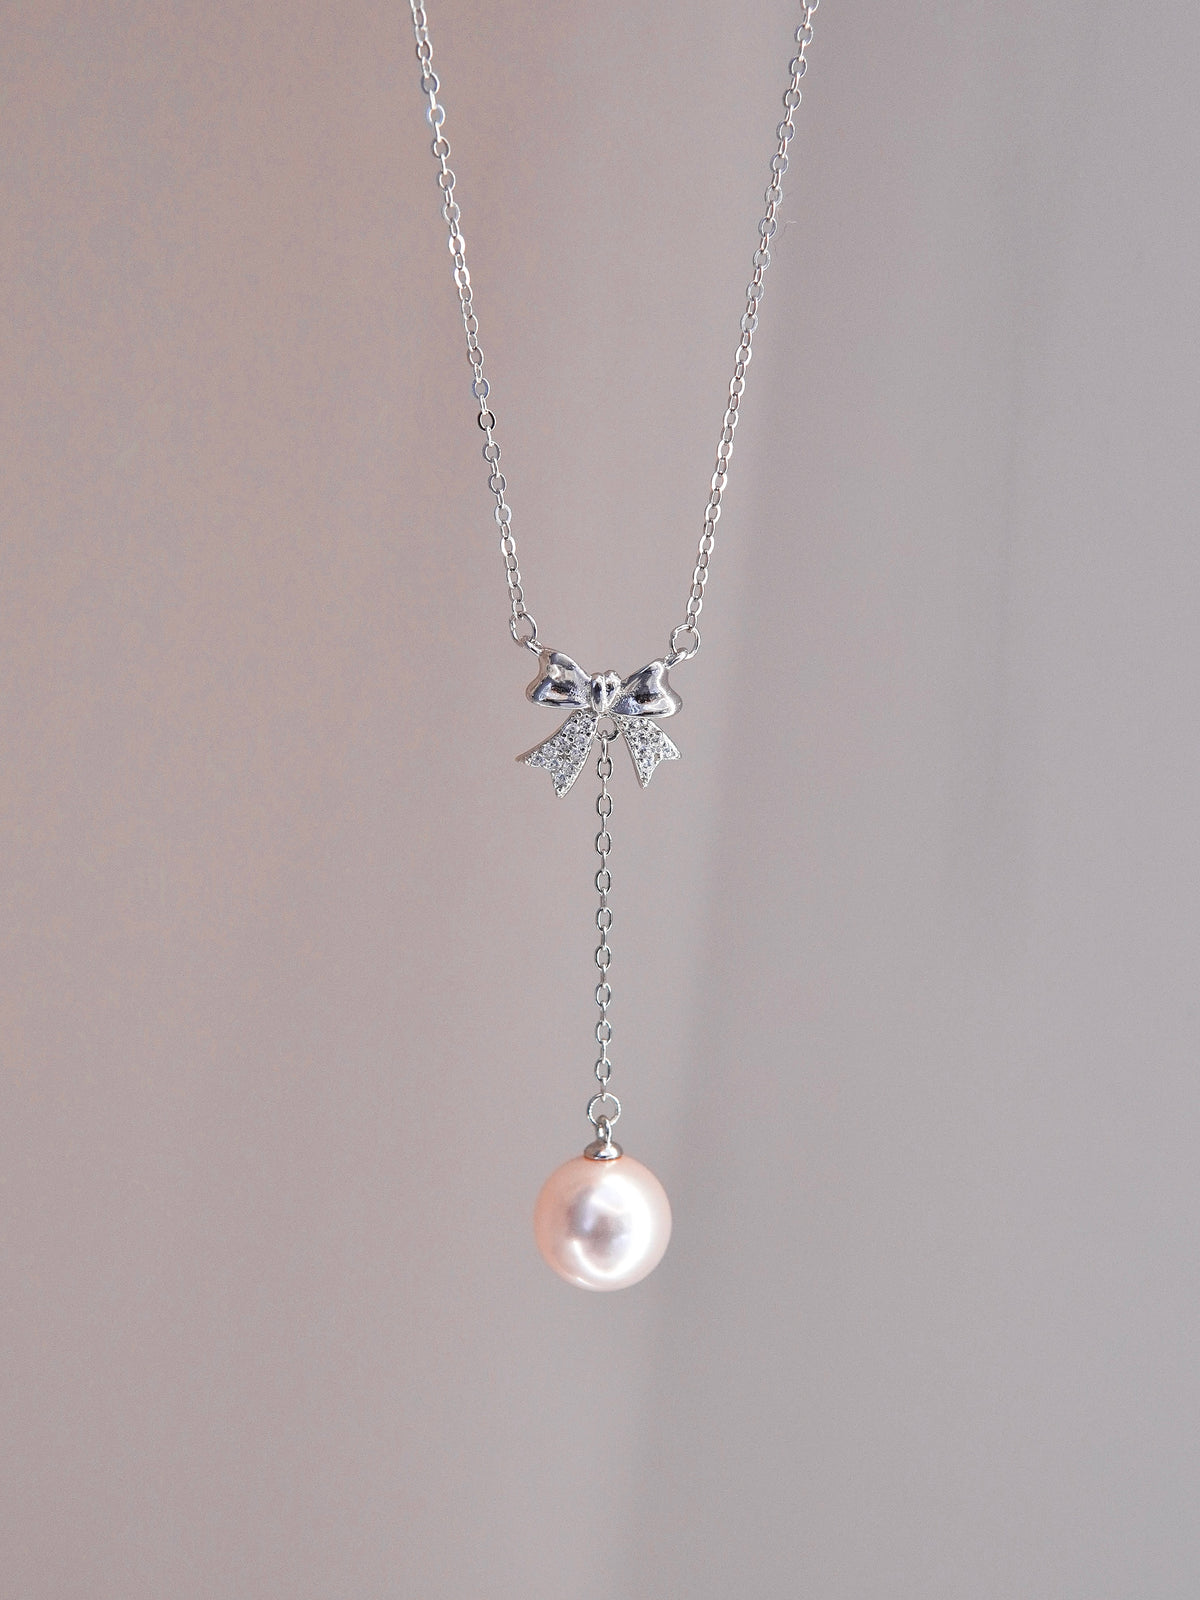 LAFIT · Bond of Happiness - Necklace 仙氣精緻蝴蝶珍珠頸鏈